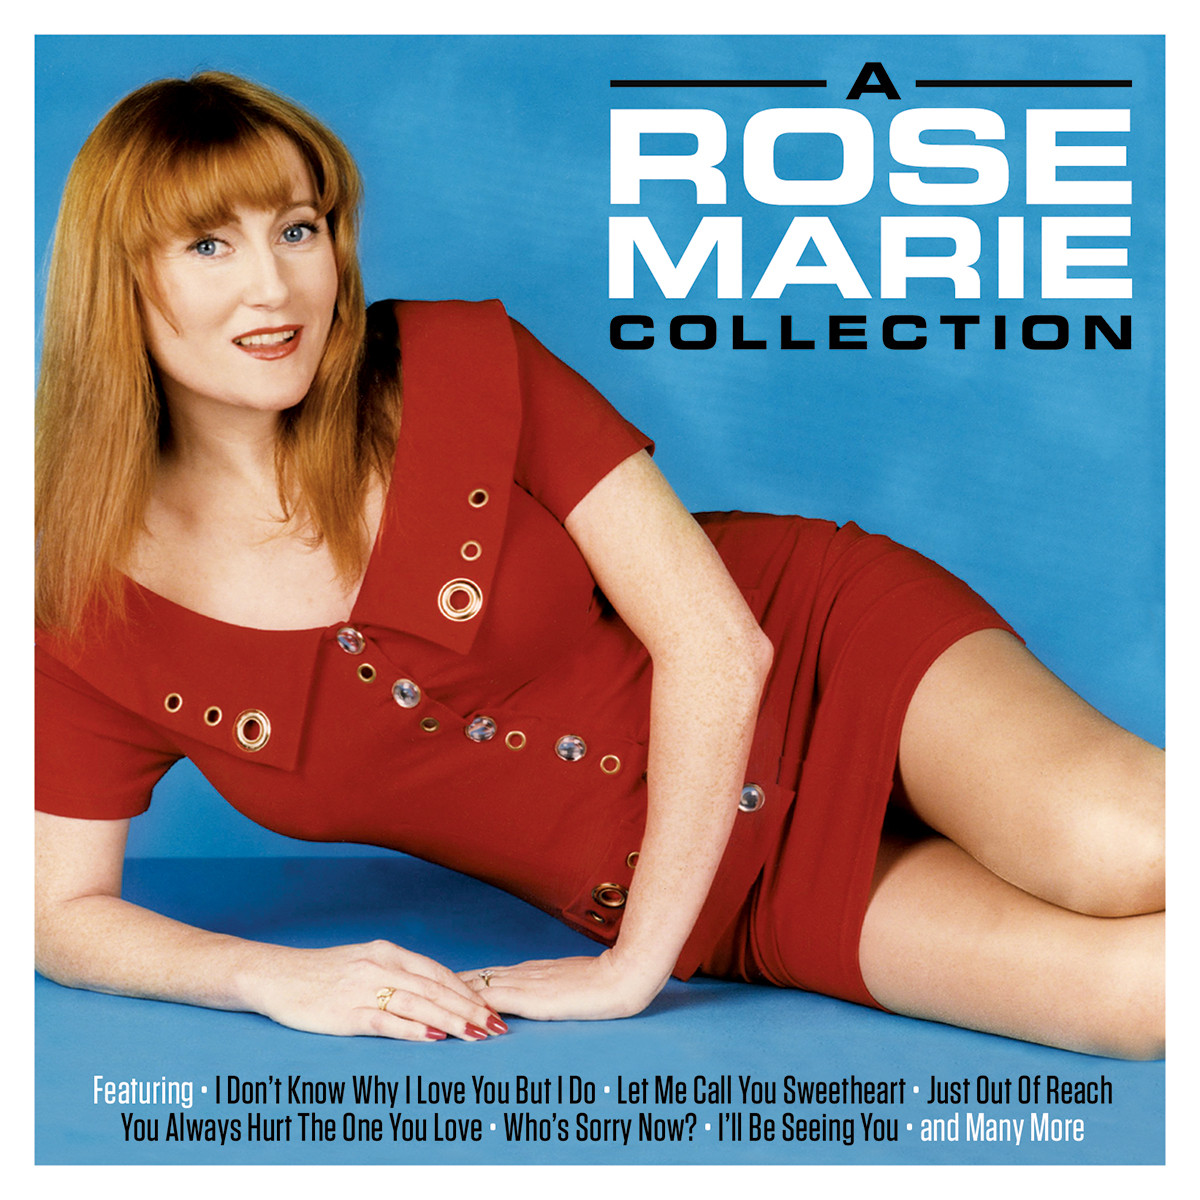 Maria collection. Rose CD.